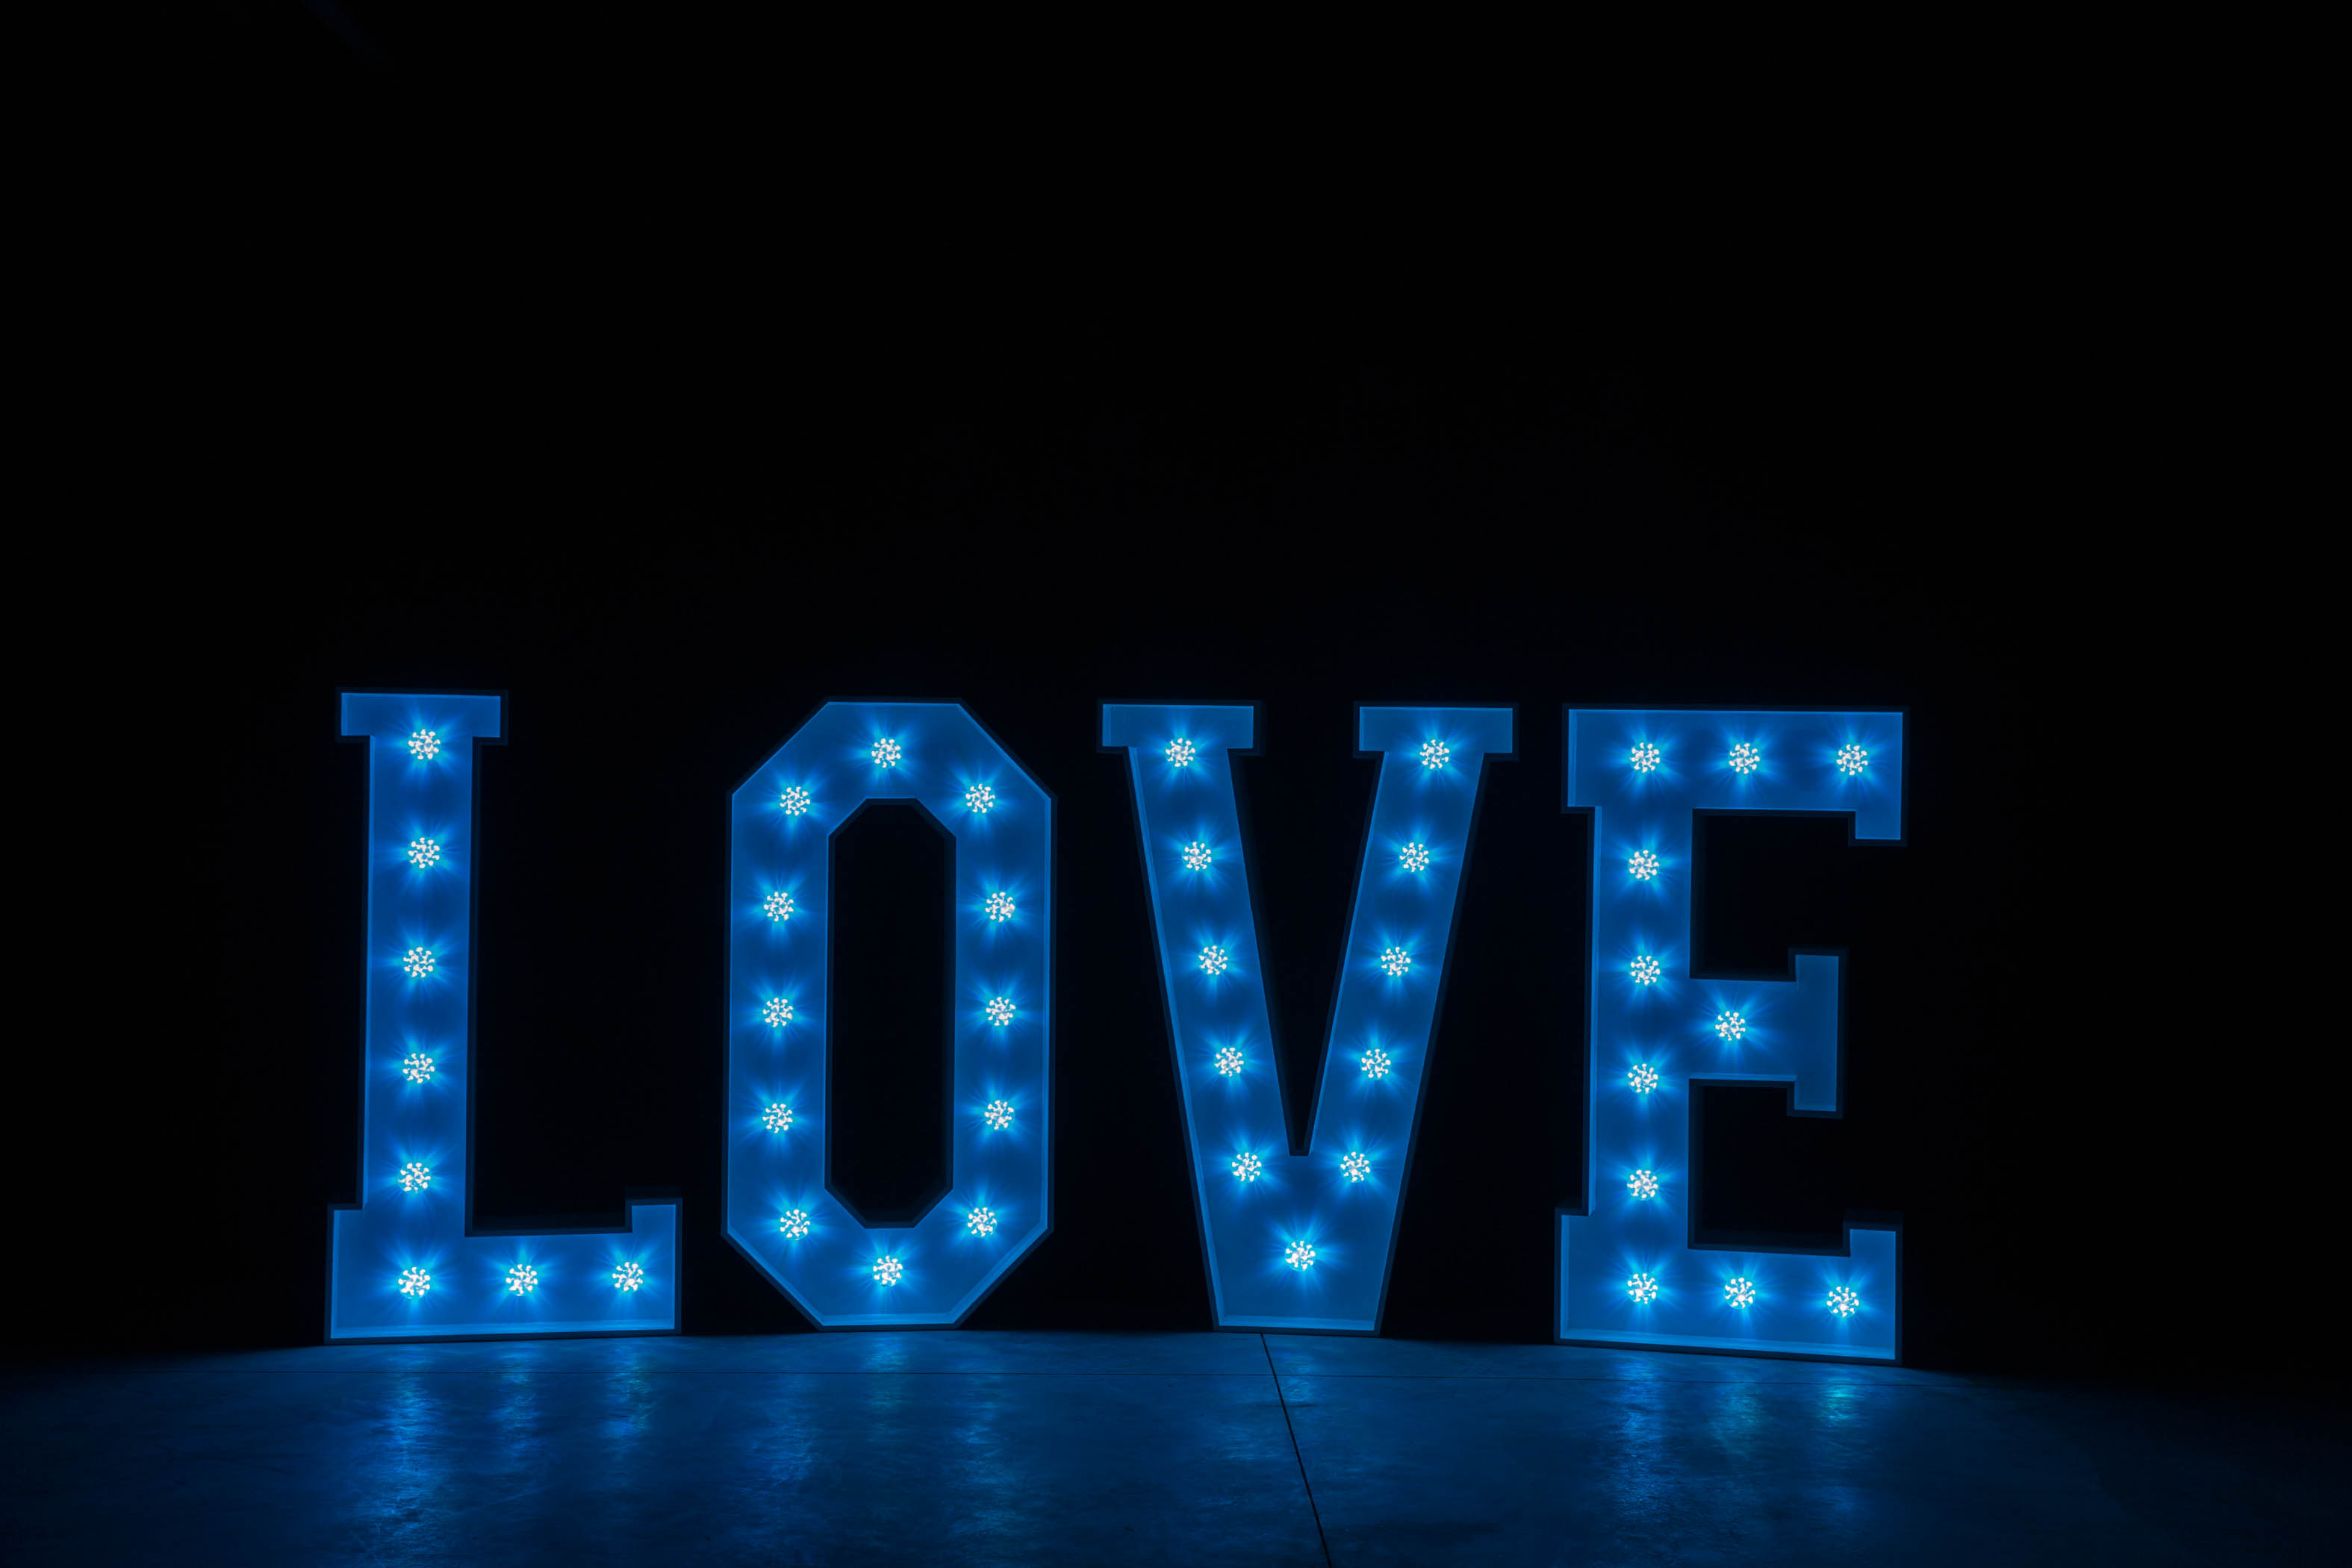 4' LOVE Letters - Light Blue Light - Photo by Viscosi Photography